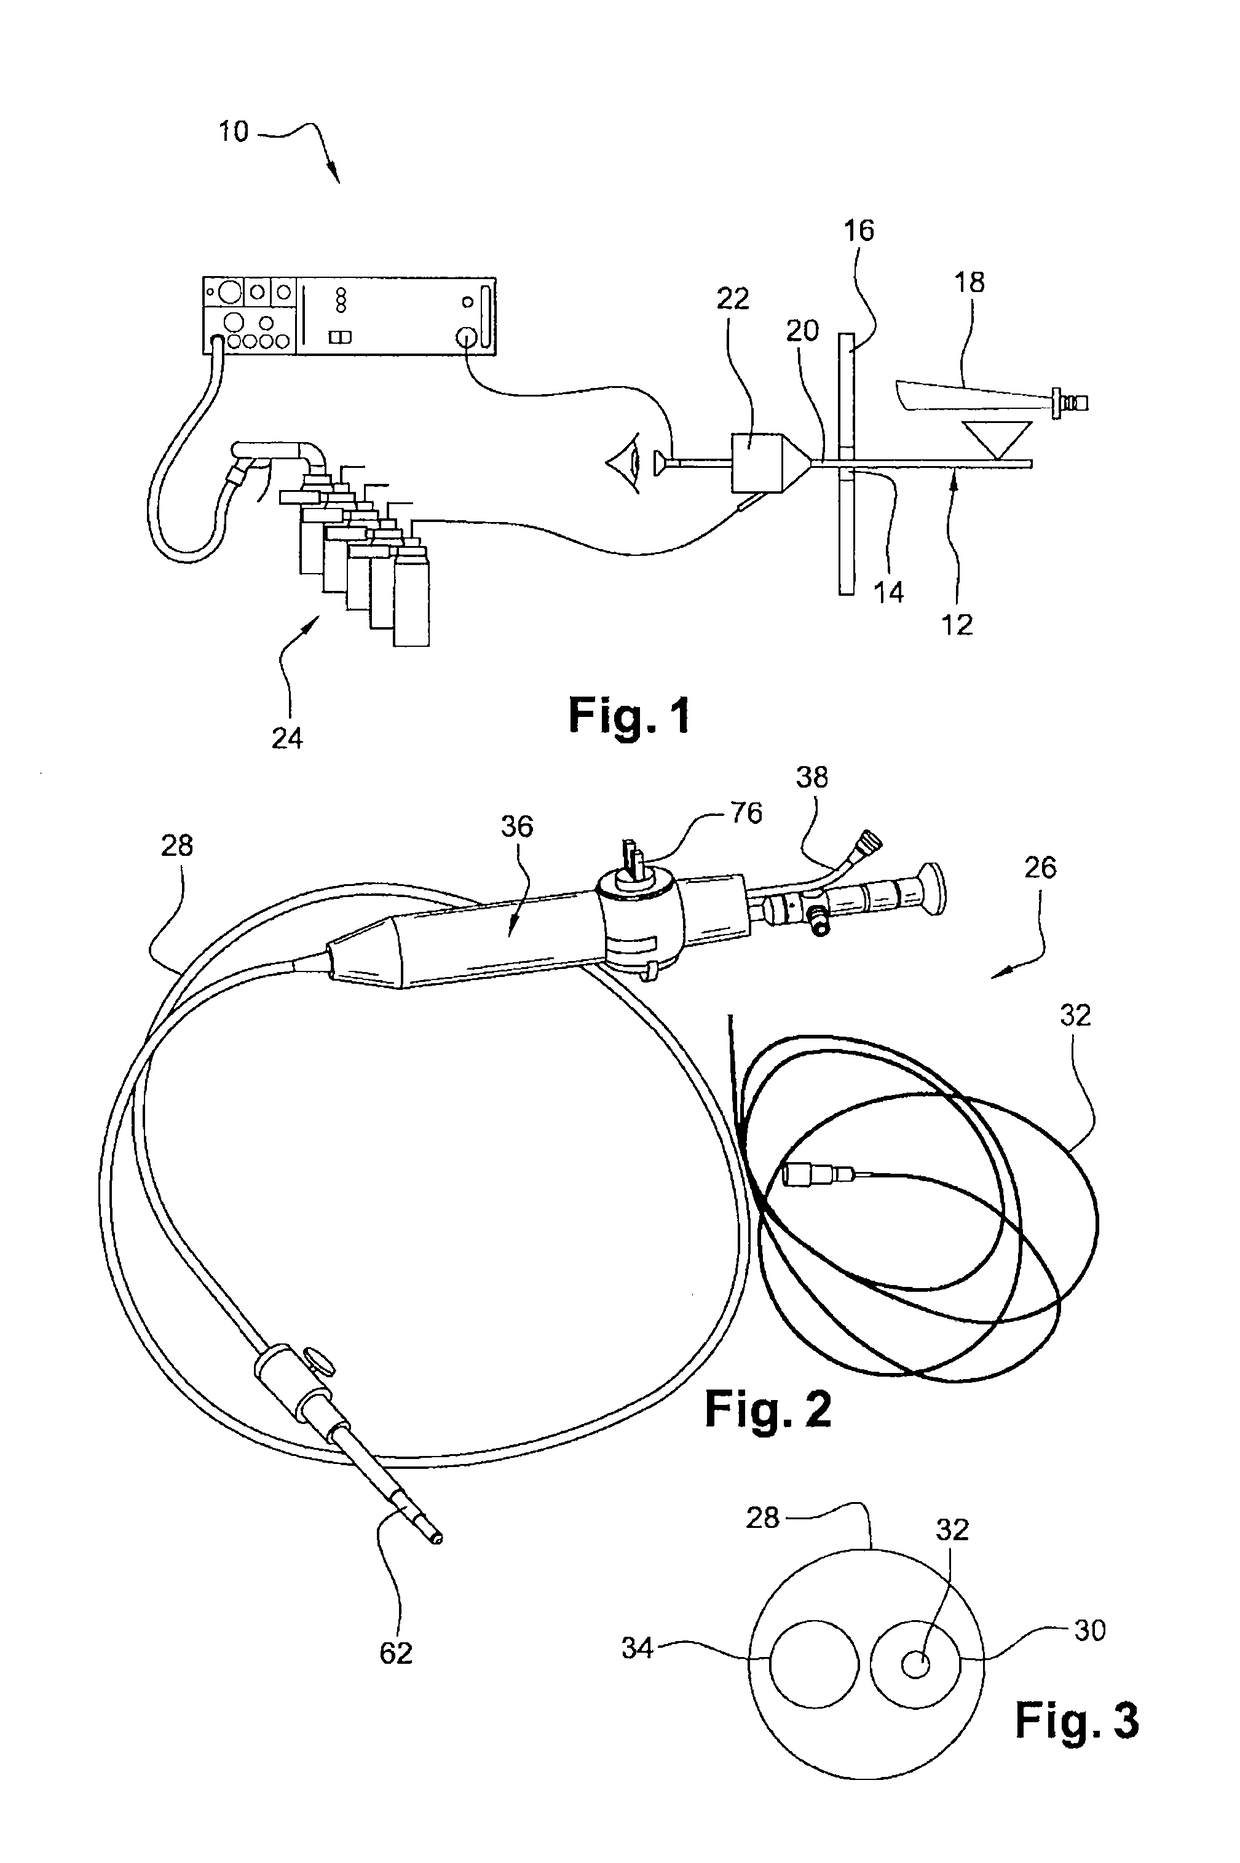 Device for searching for defects on parts by endoscopy